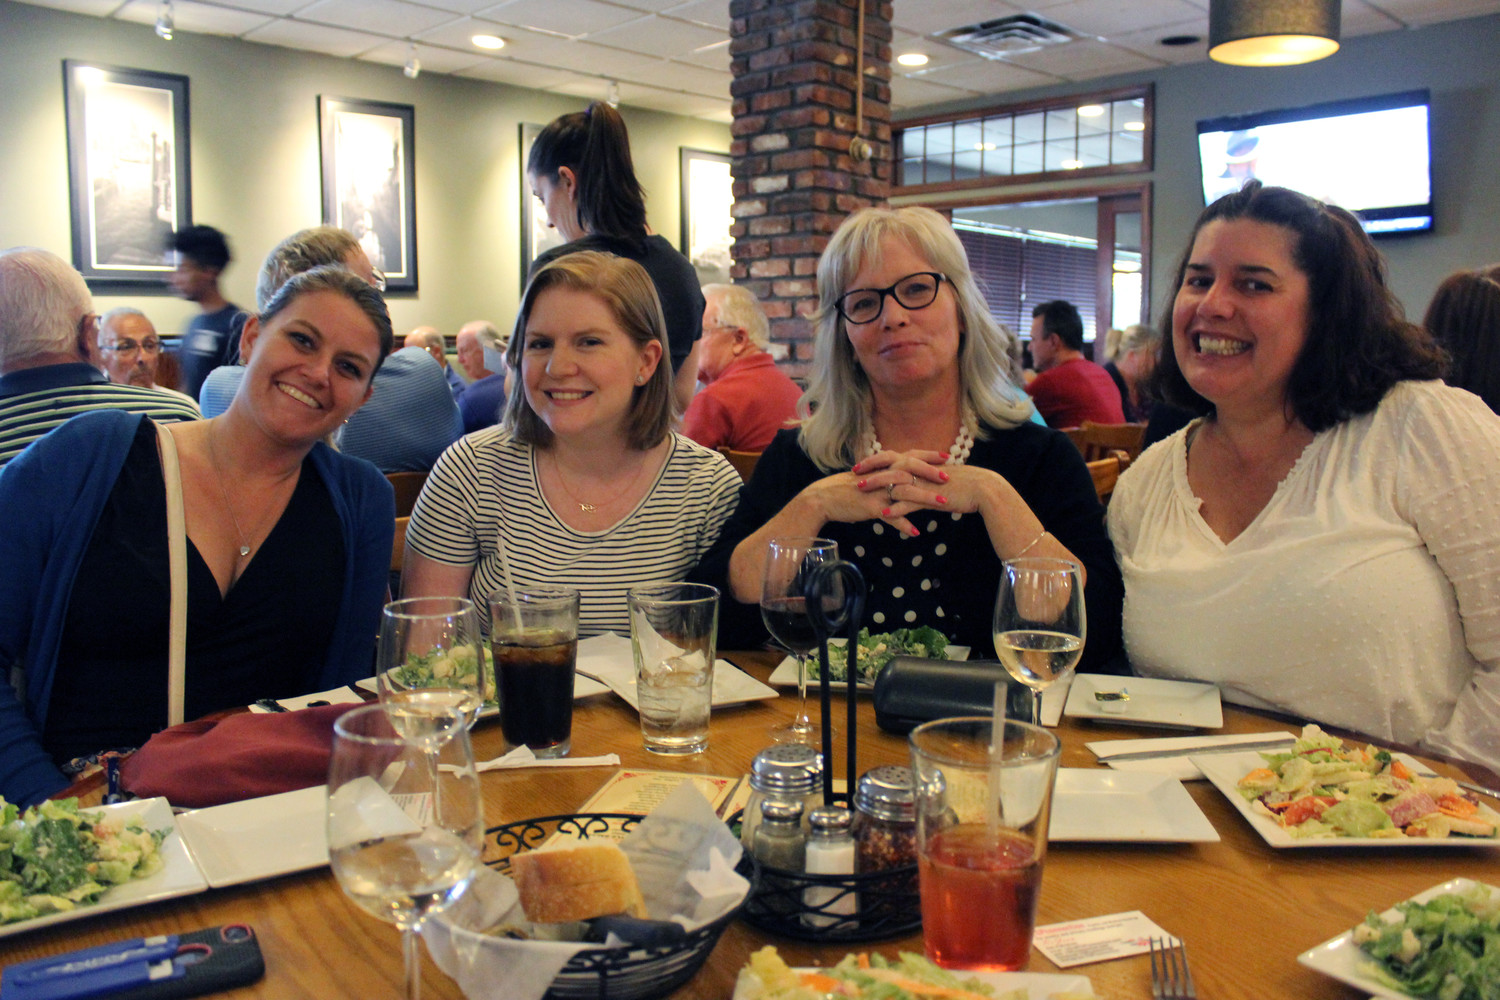 PeggyAnn Matusiak, second-from-right, of East Meadow, and her friends Mairead Matuscoli, Jen Corbett and Joan Iacoli spent a girl’s night at Borrelli’s Italian Restaurant in East Meadow for its monthly Psychic Night event.